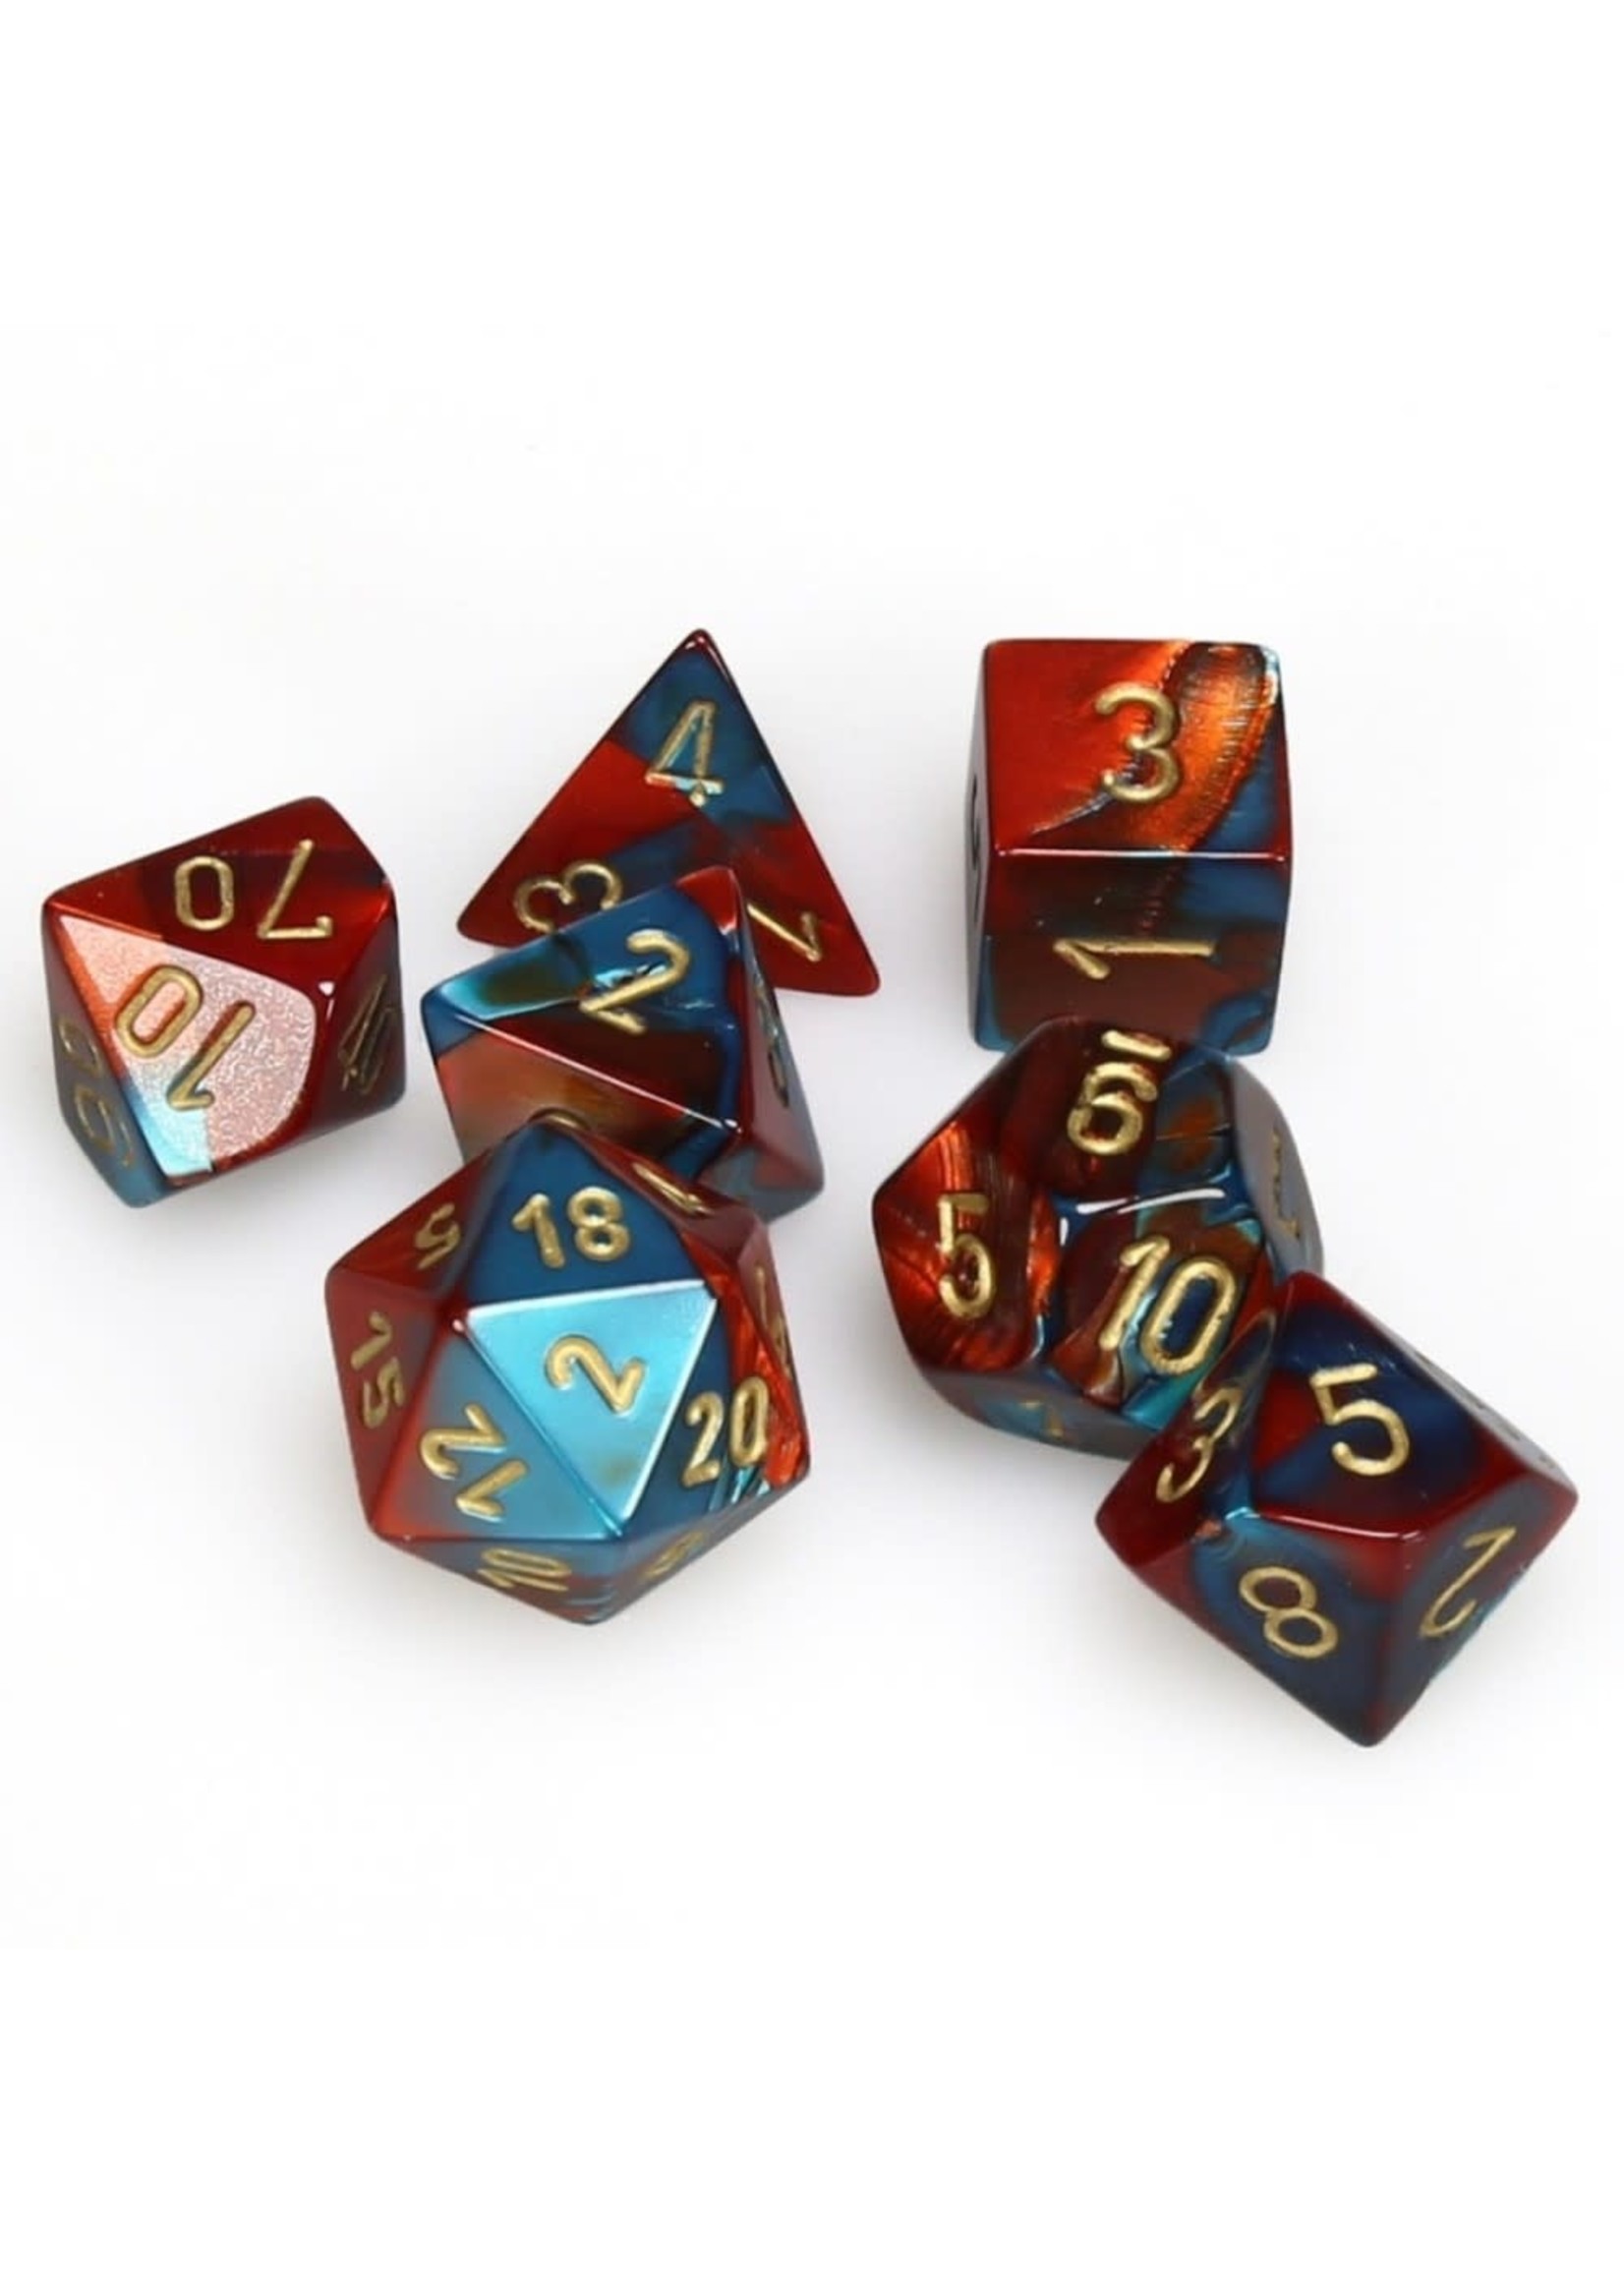 Chessex Gemini Poly 7 set: Red & Teal w/ Gold